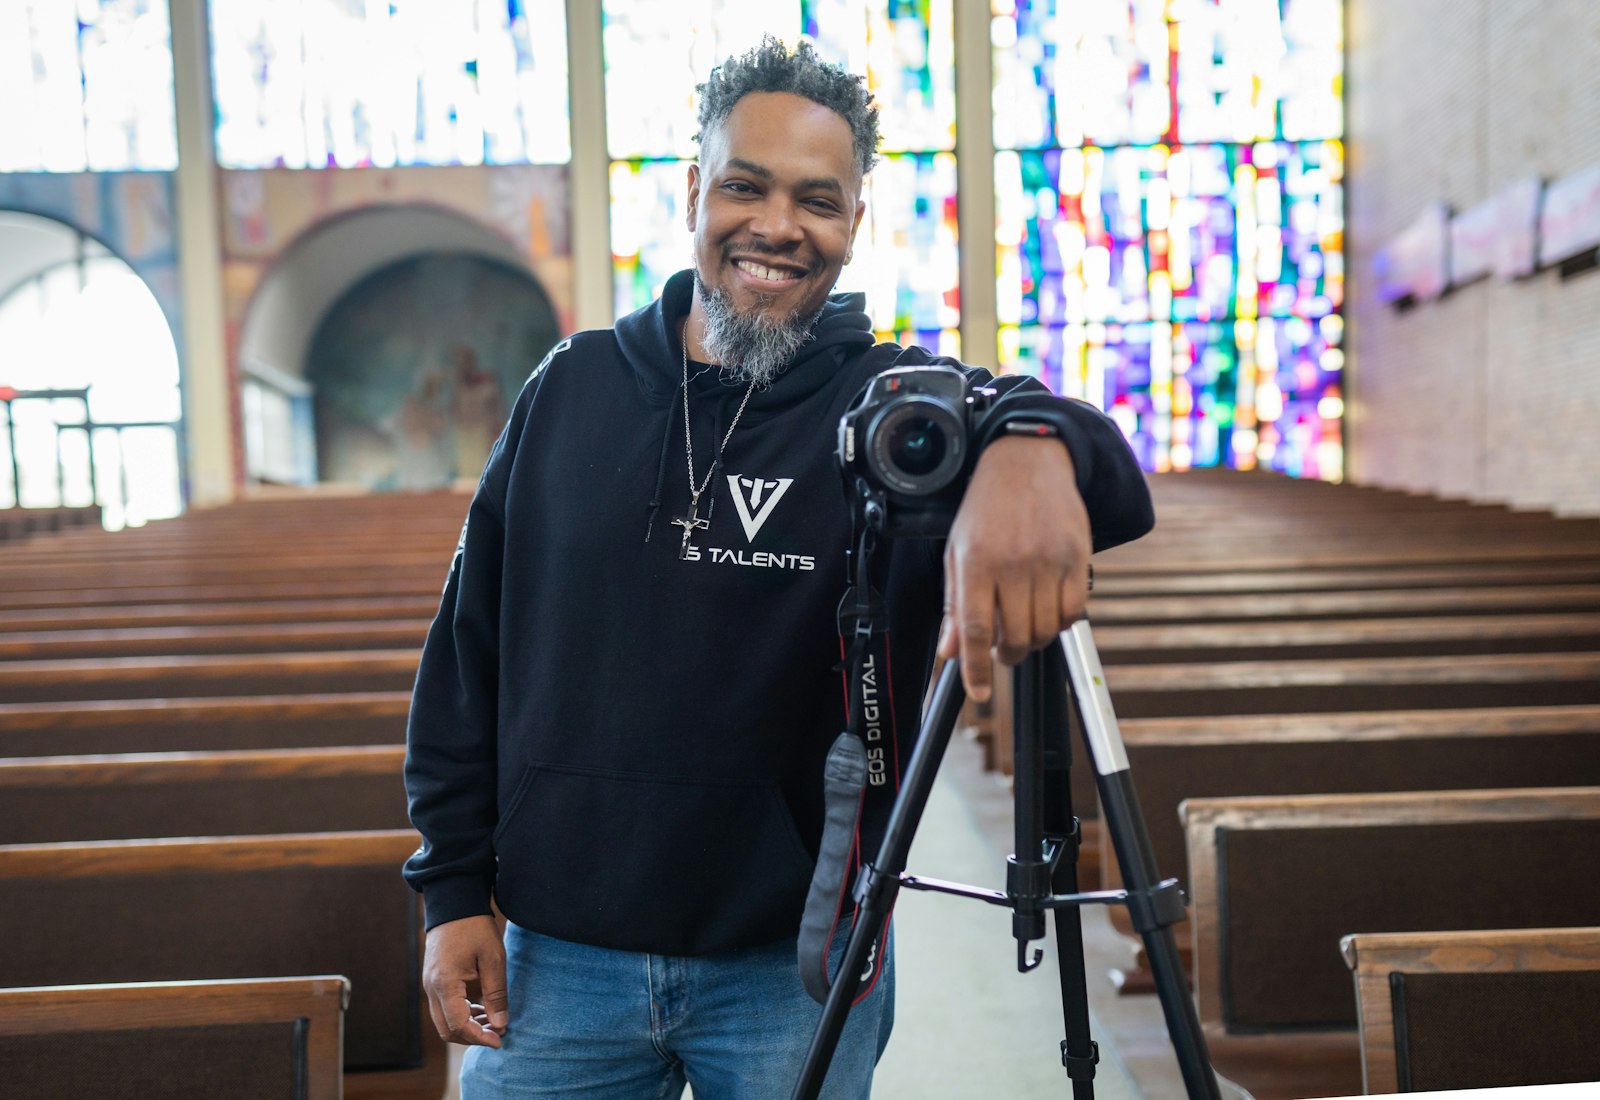 As a Black Catholic, Smith said he often posts videos about his faith and answers questions from followers curious about his religion. He's currently producing a series of videos about Black Catholic saints.